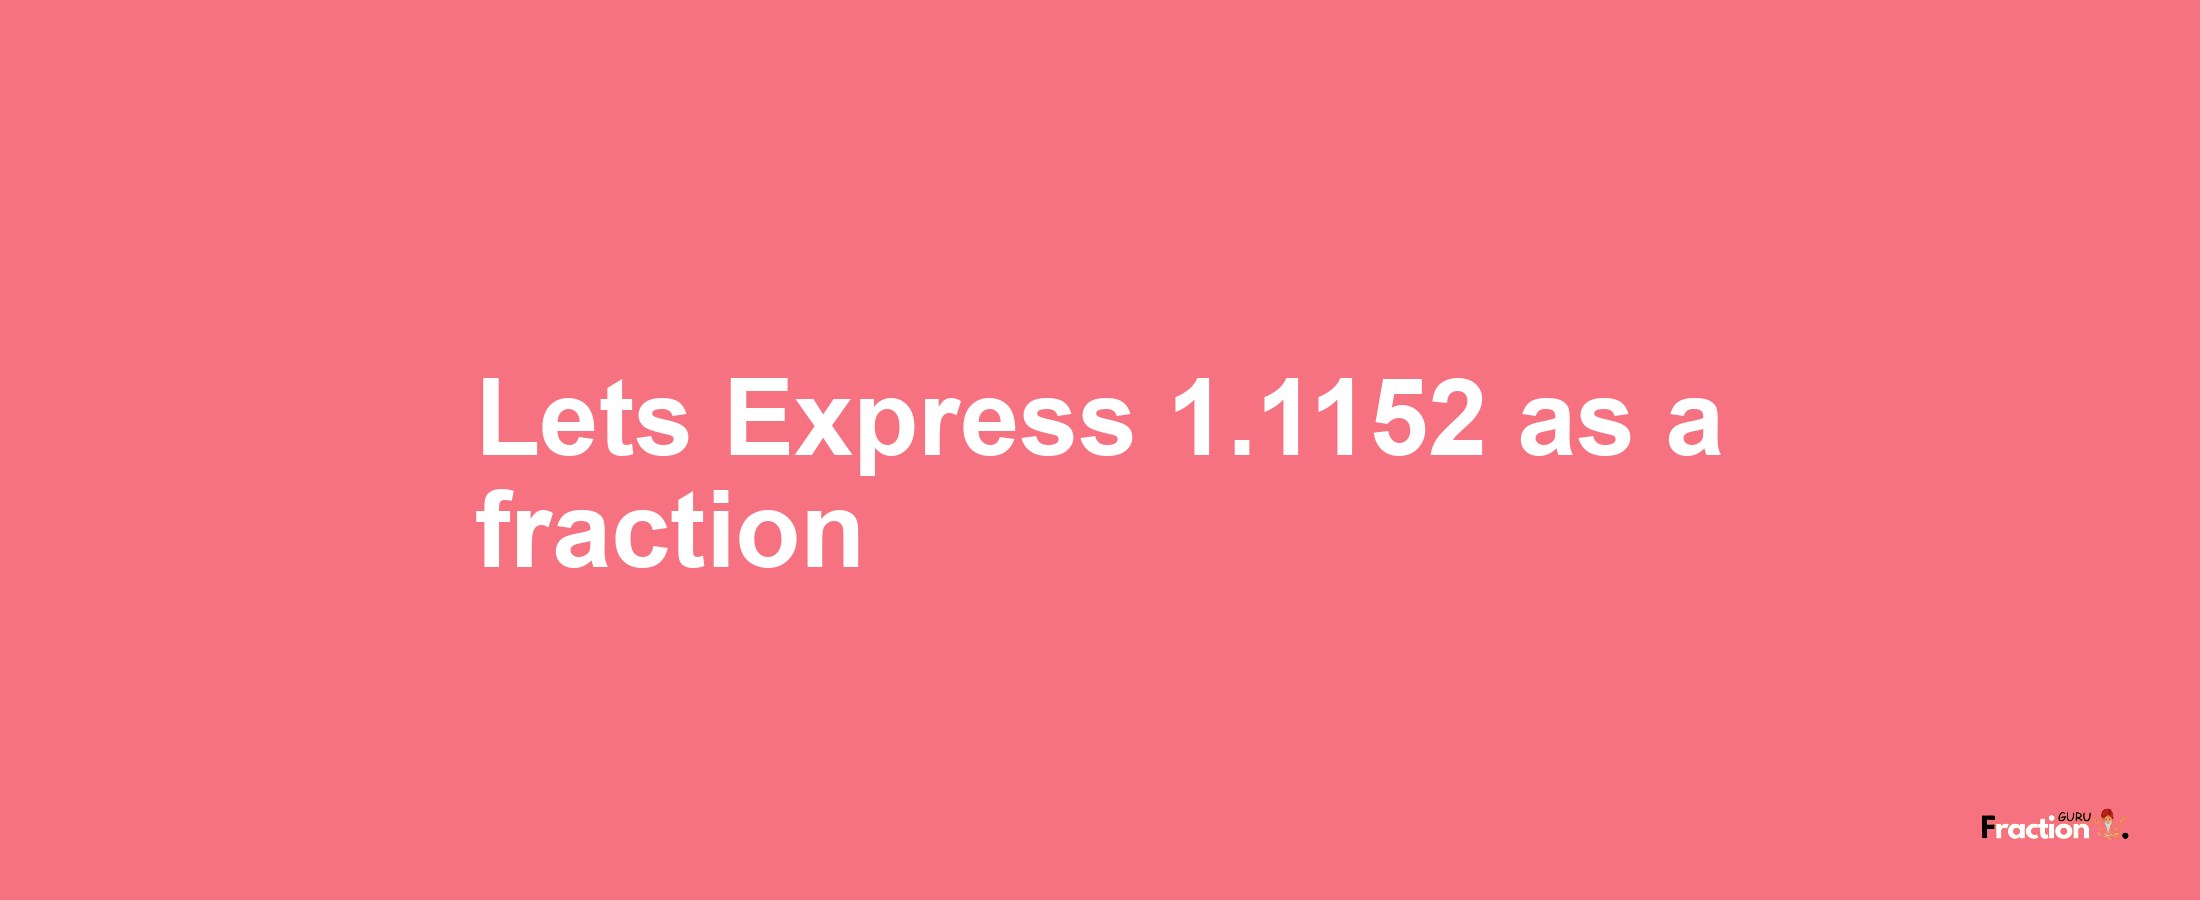 Lets Express 1.1152 as afraction